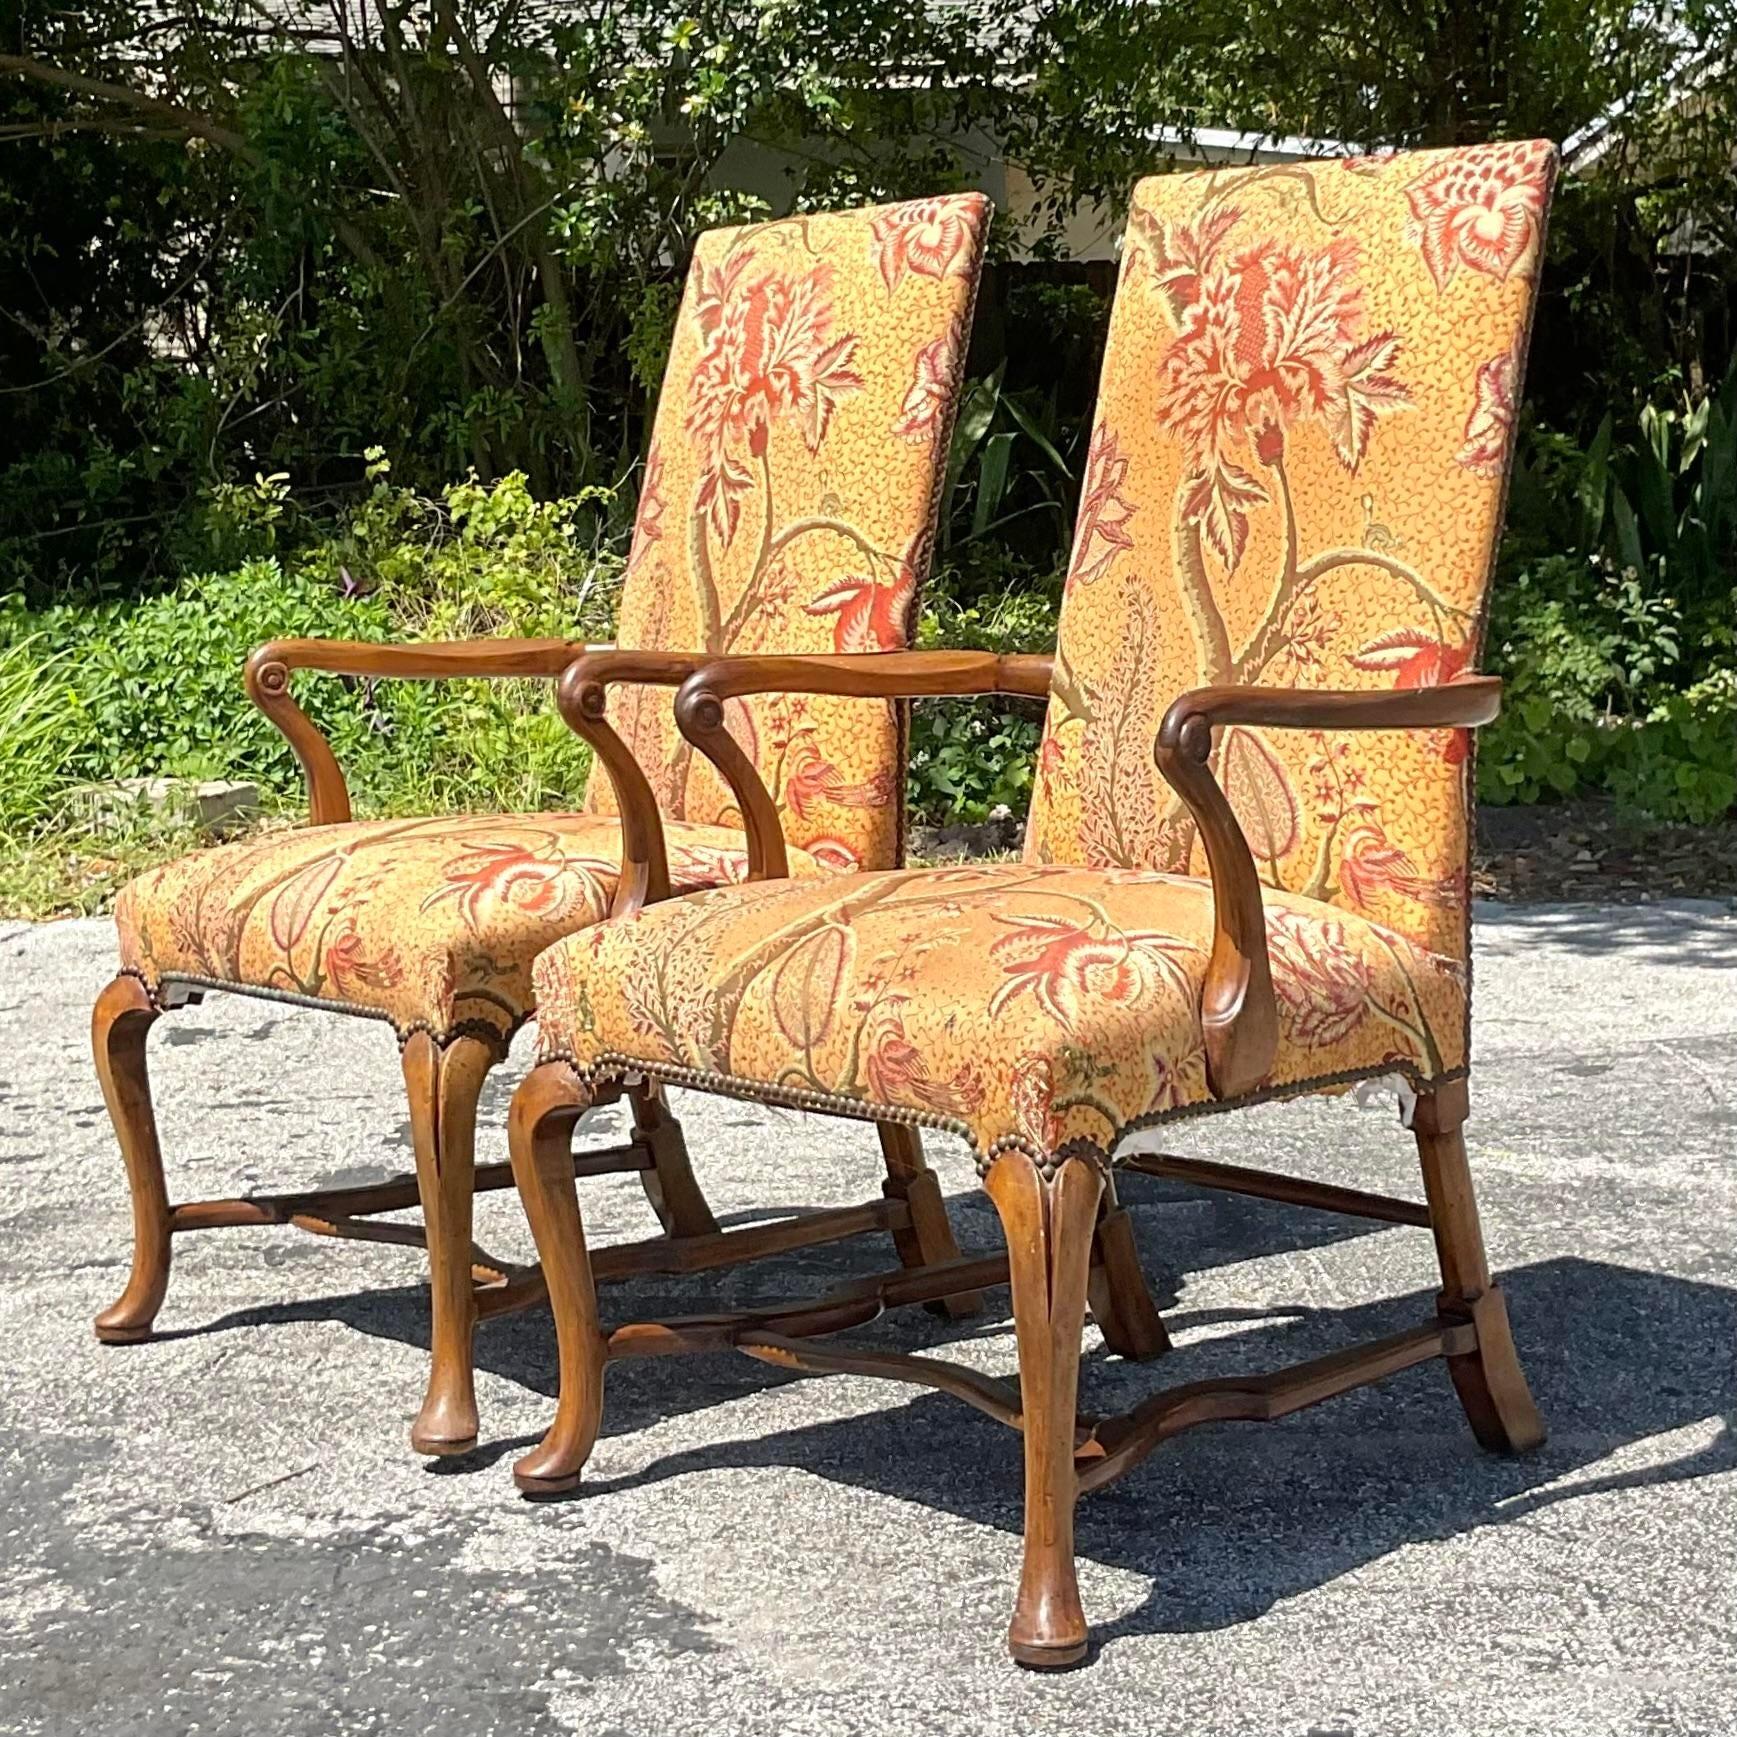 Upholstery Vintage Regency Shepard’s Crook High Back Chairs - a Pair For Sale